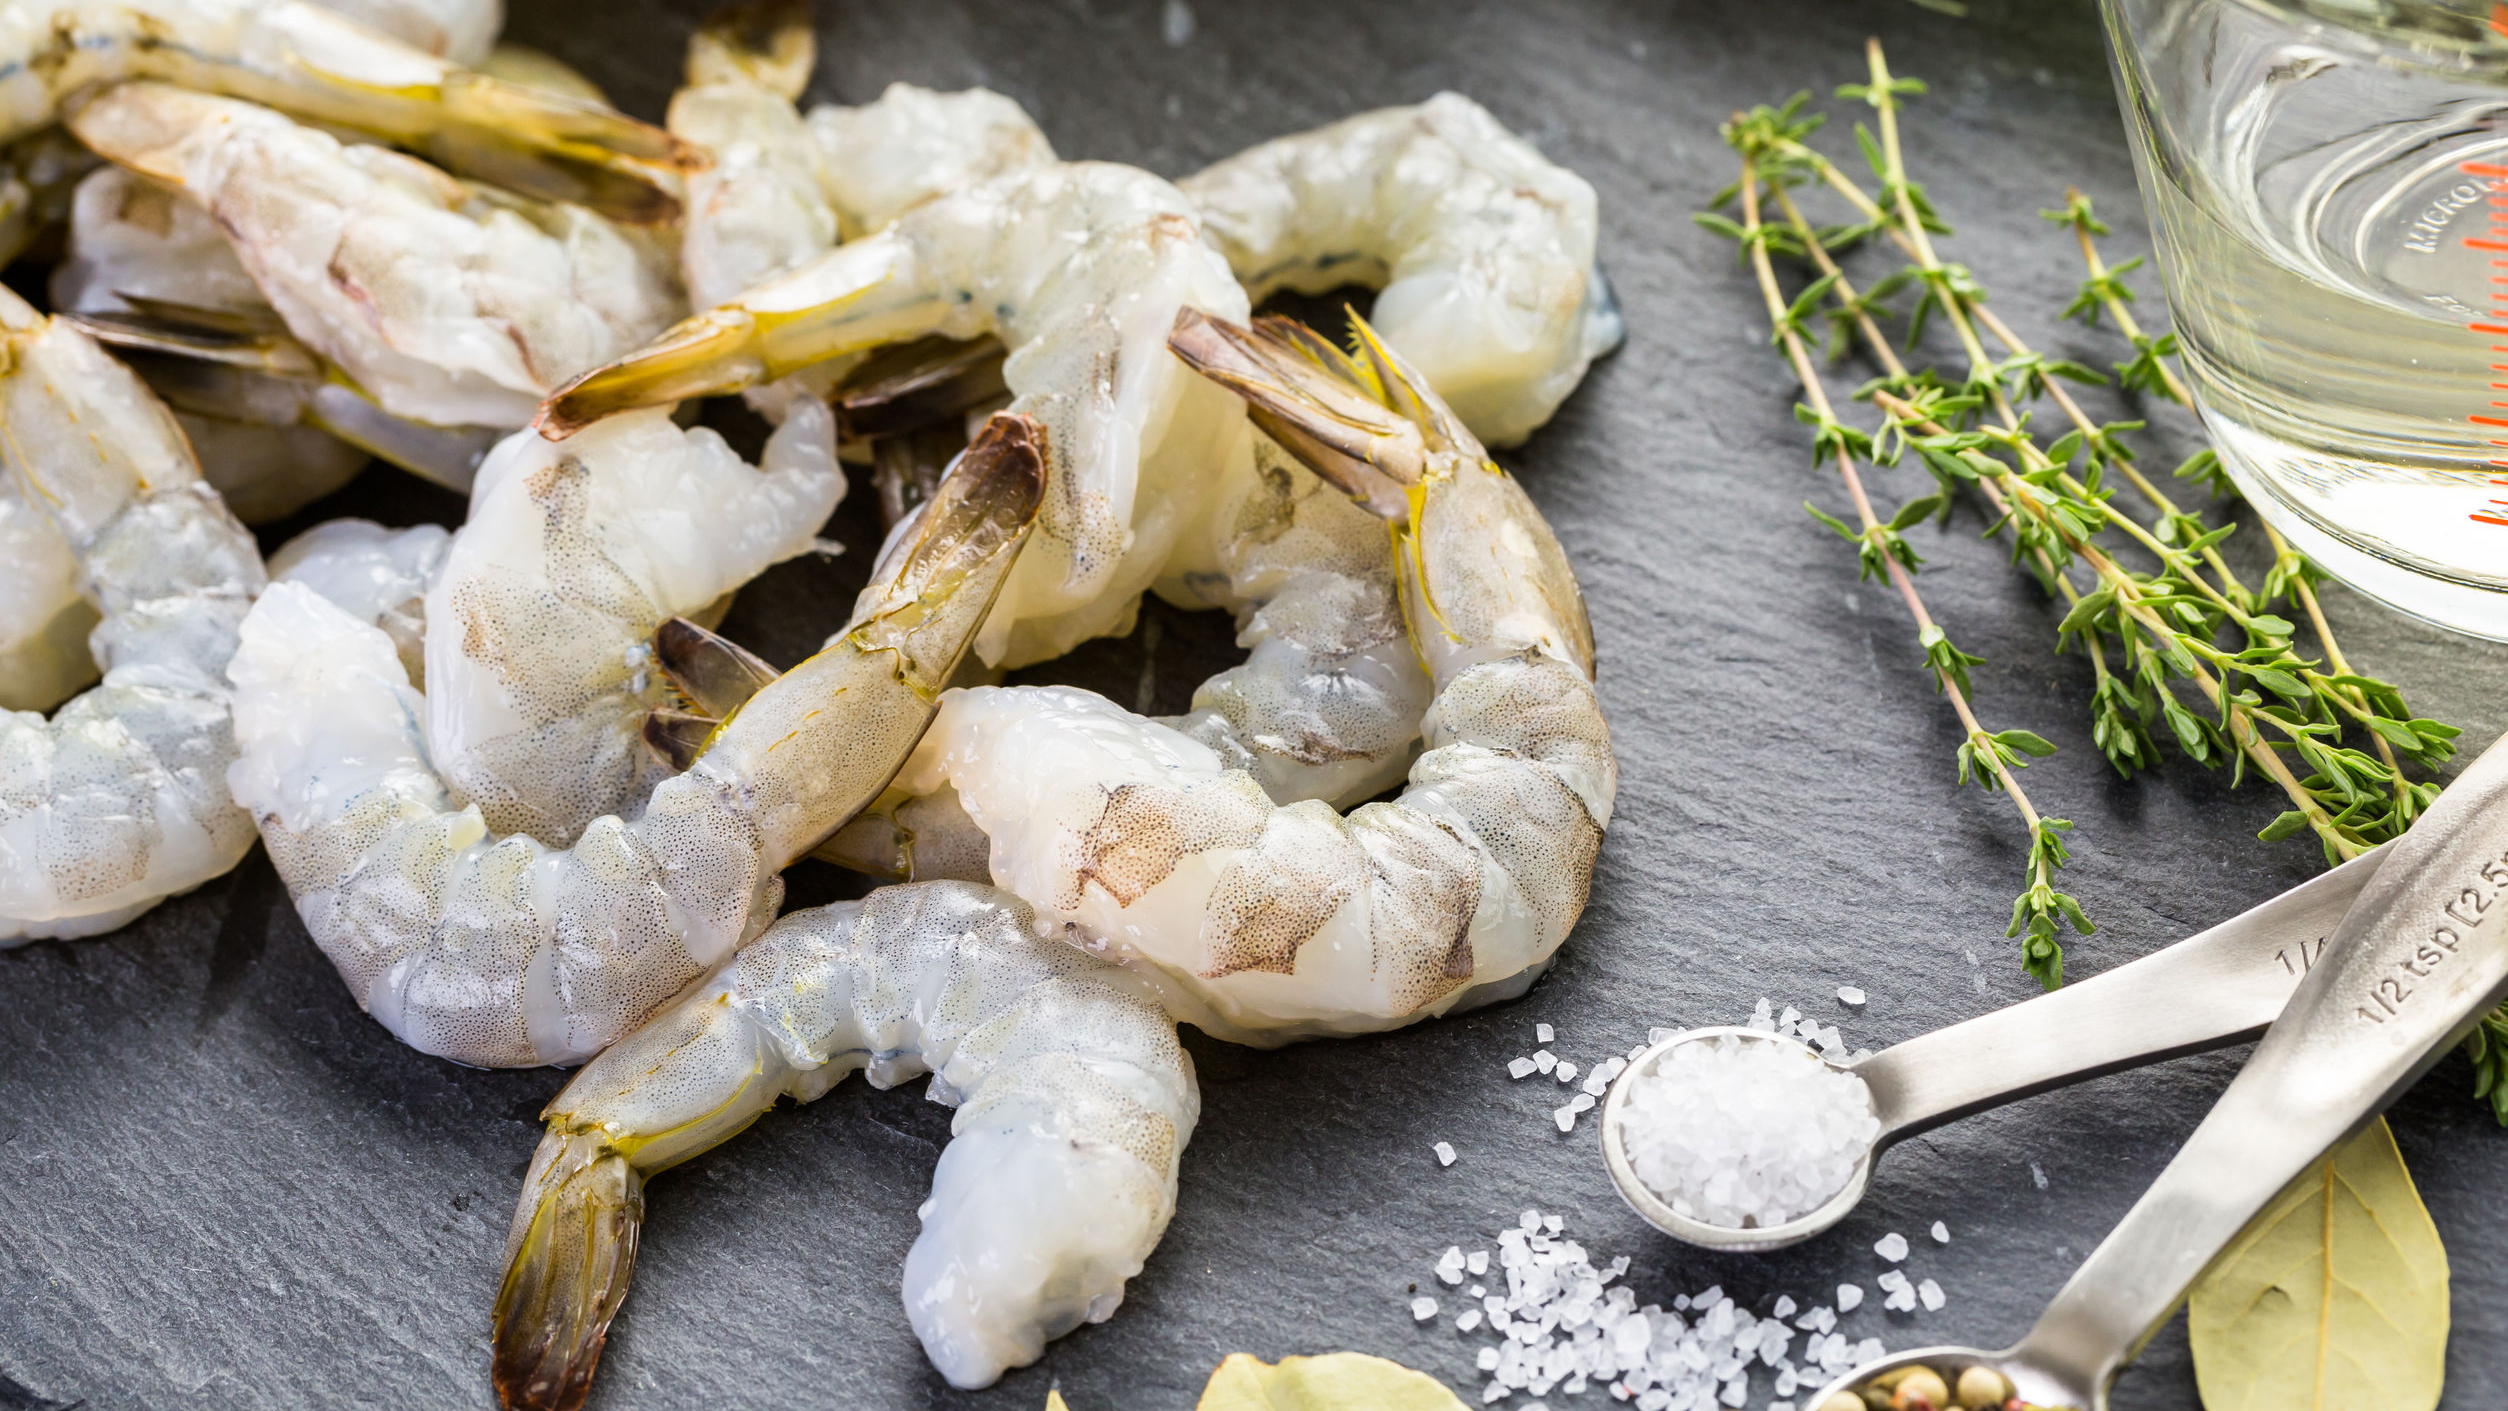 How To Make a Crowd-Pleasing Shrimp Scampi - The Manual